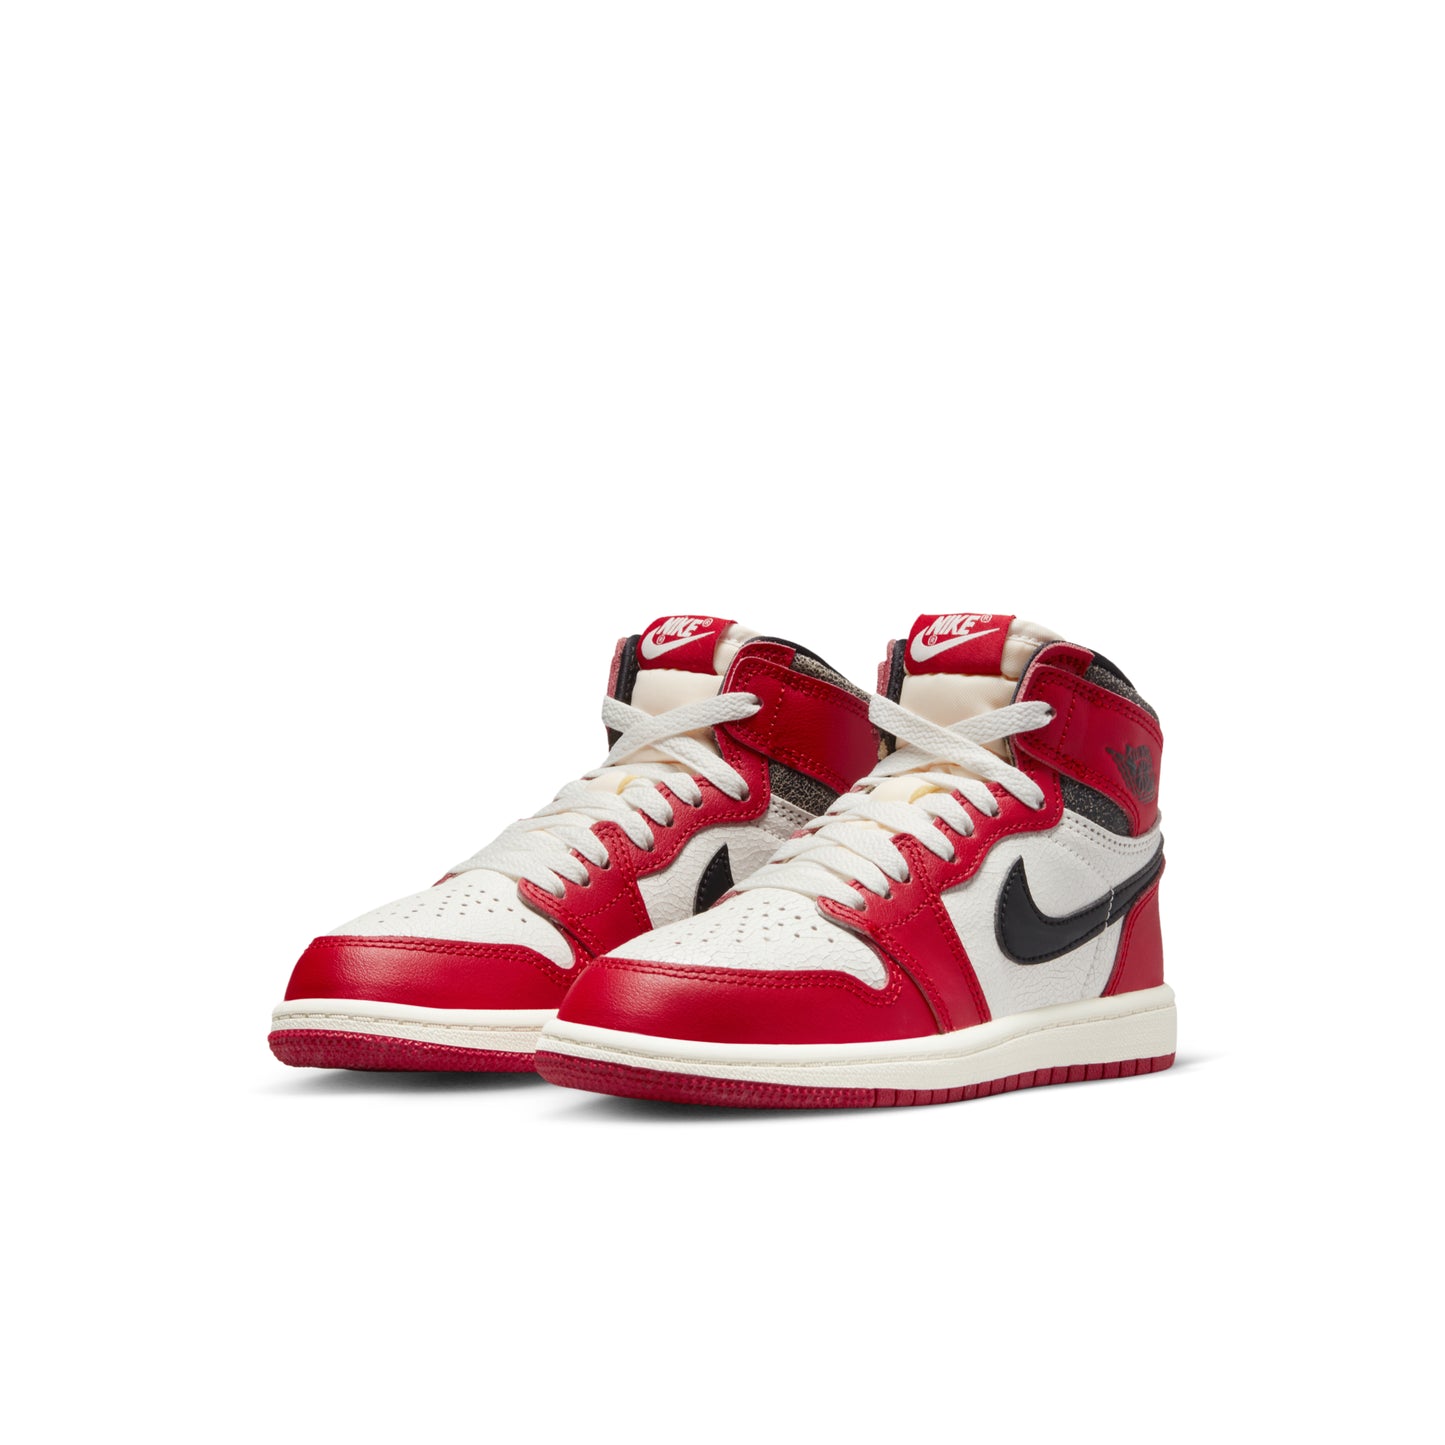 Nike Air Jordan 1 Retro High OG Chicago Lost and Found PS